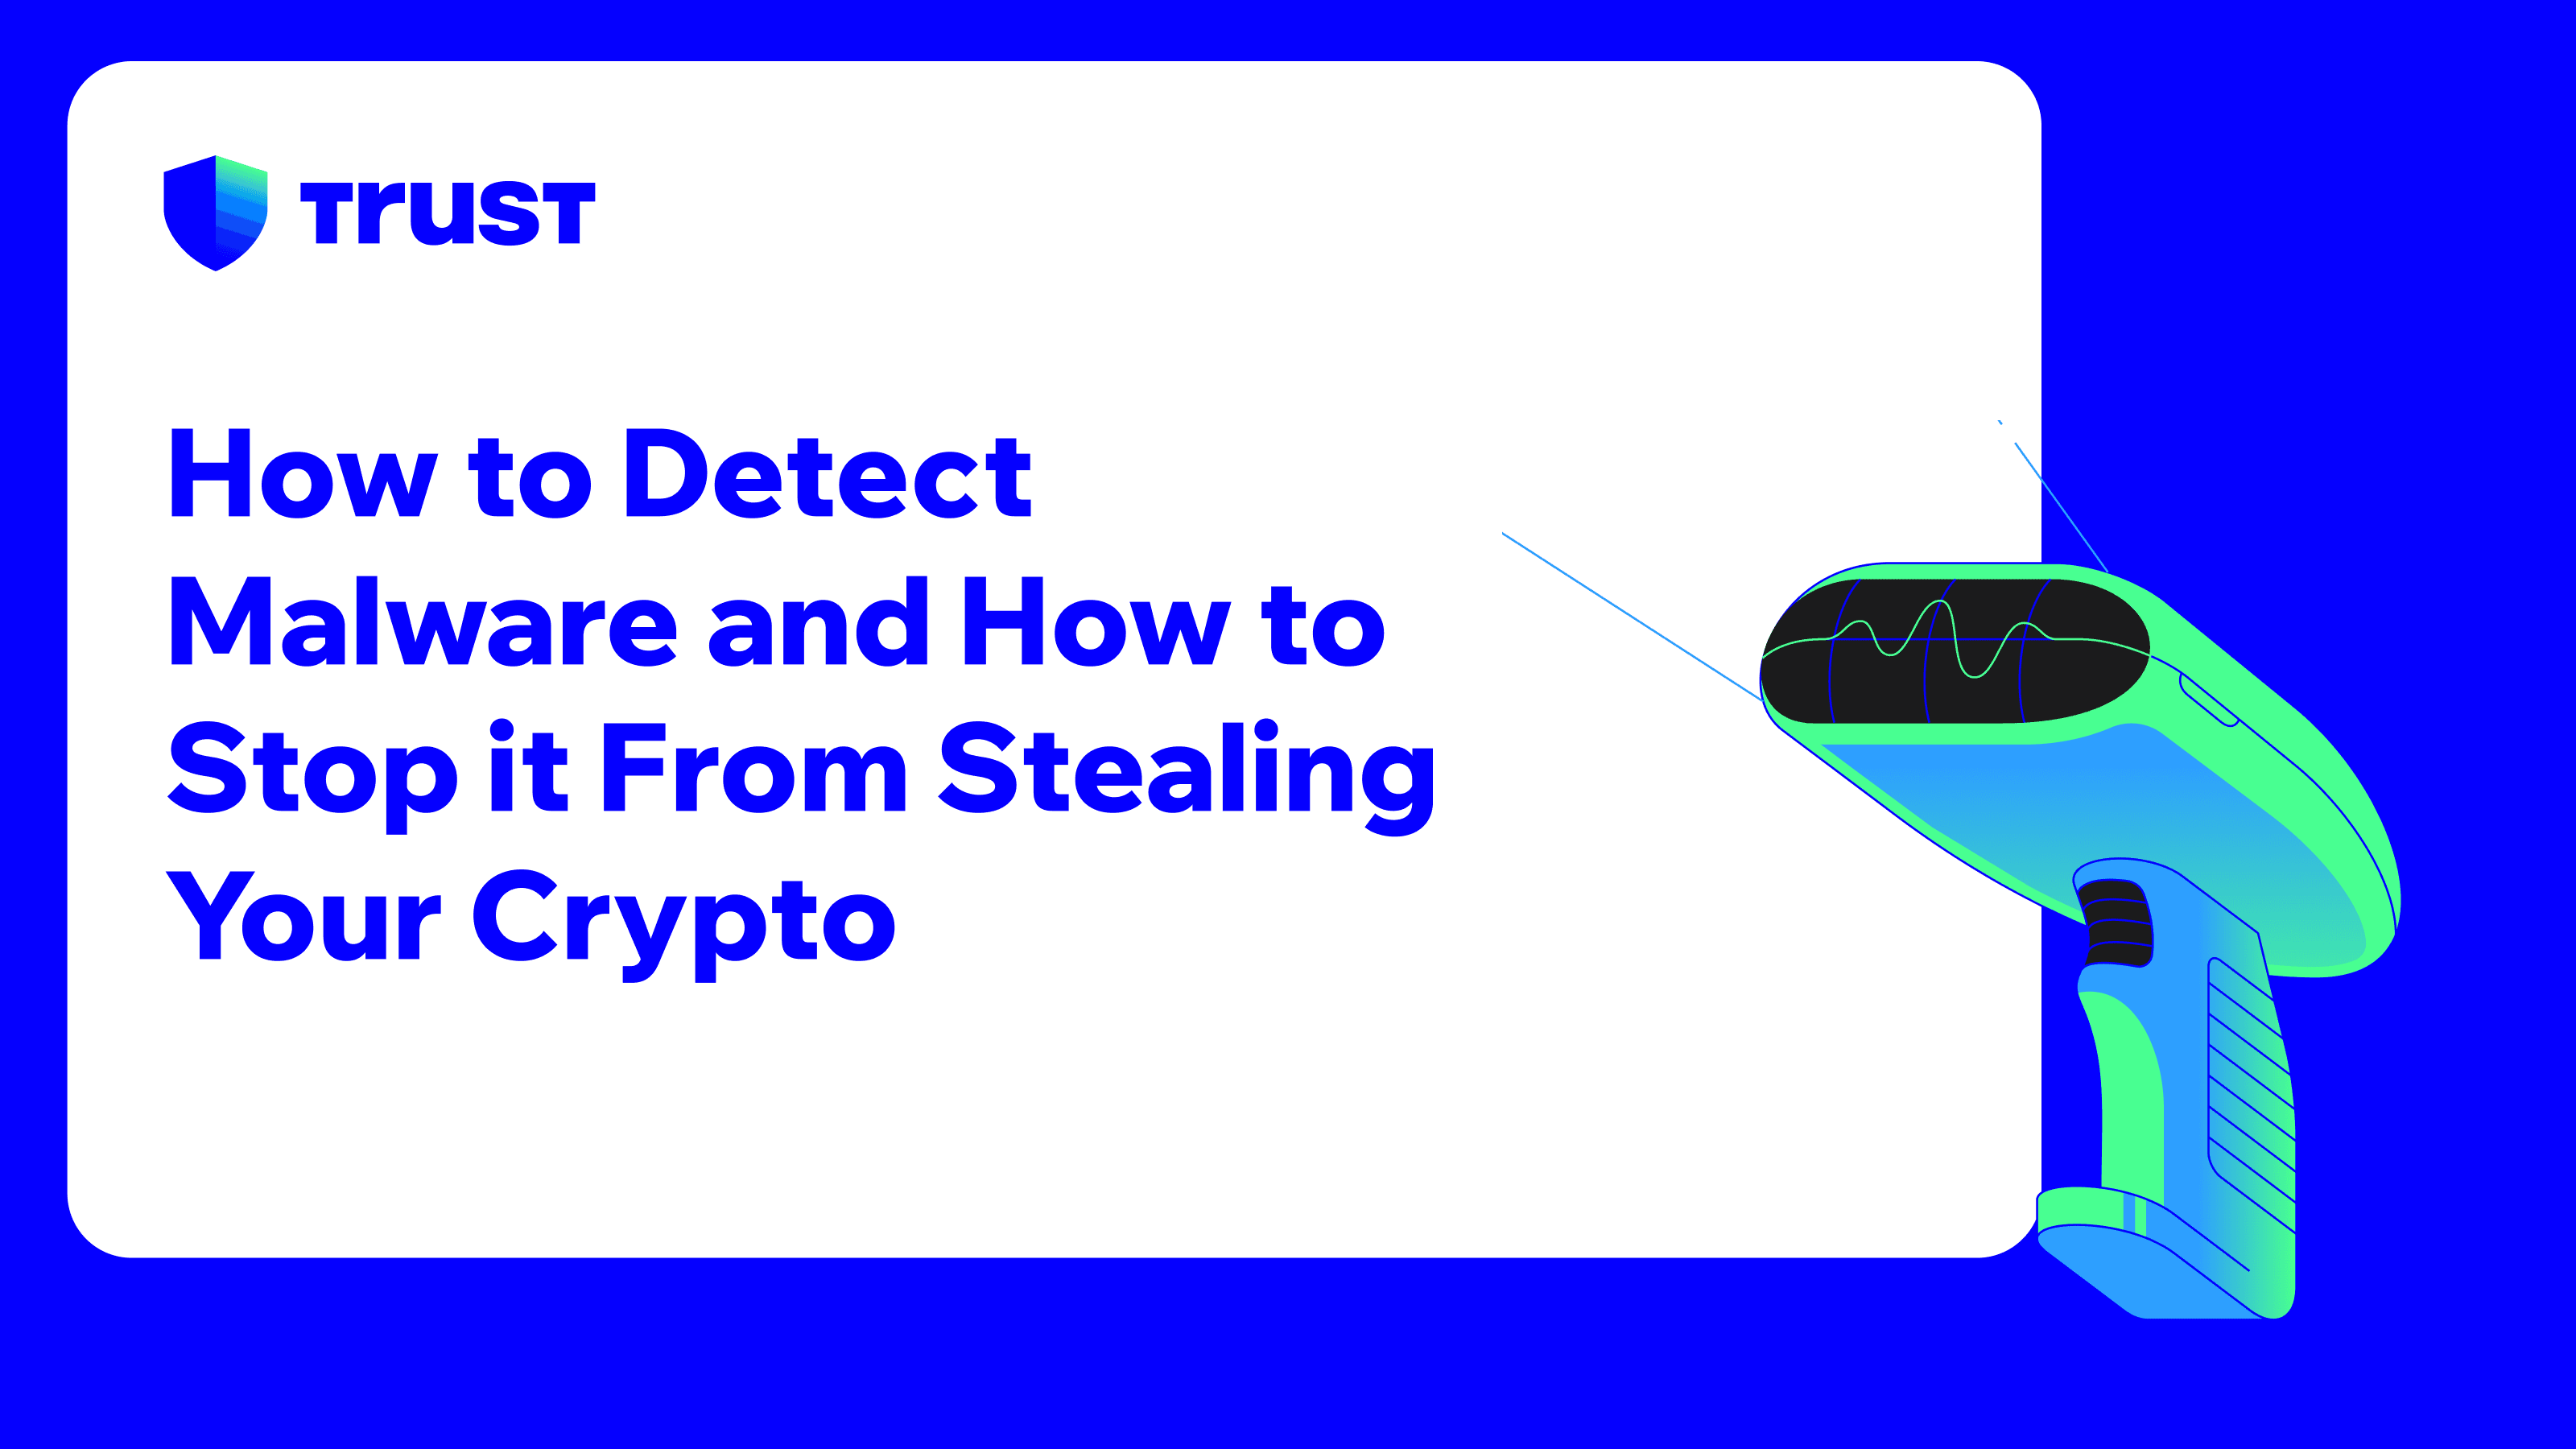 How to Detect Malware and How to Stop it From Stealing Your Crypto